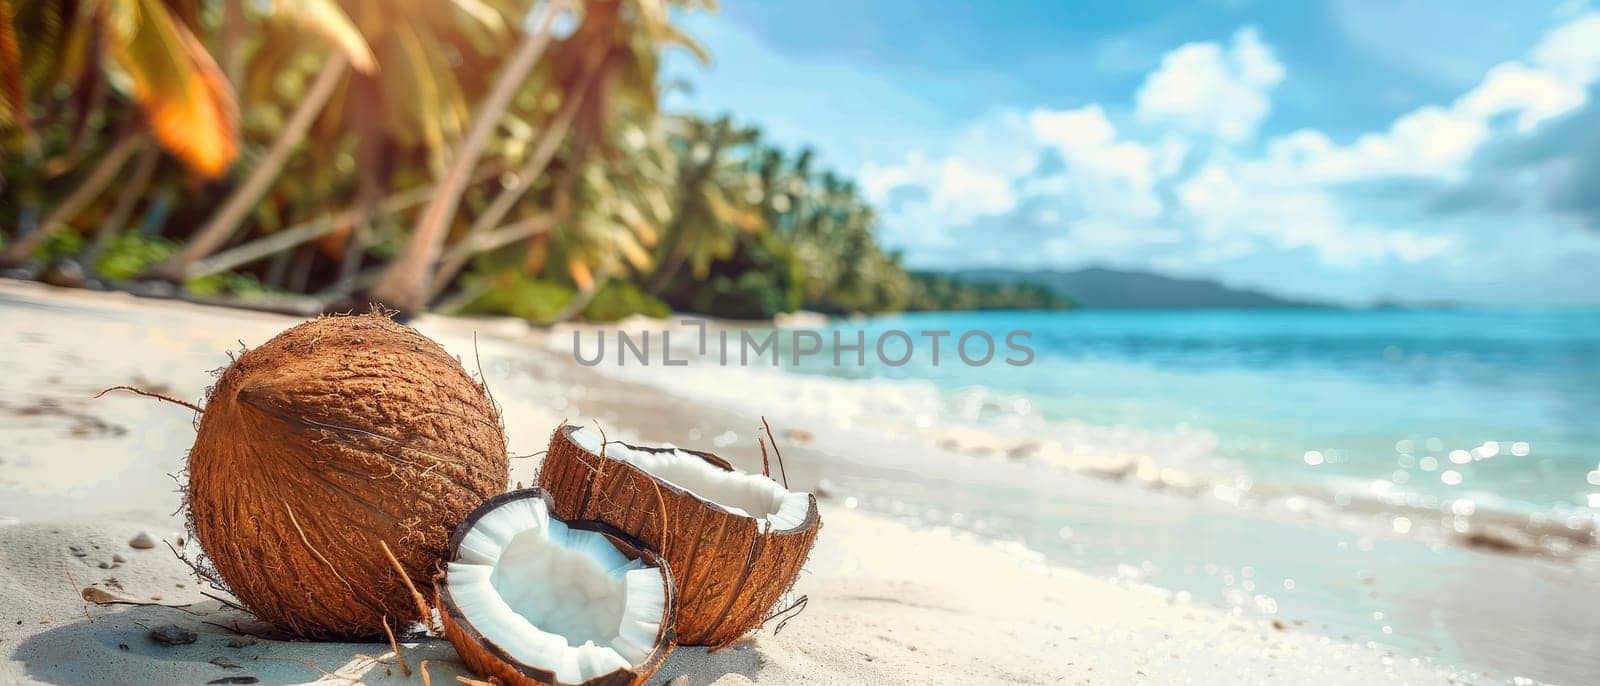 Three coconuts are on the beach, one of which is cut open by AI generated image.